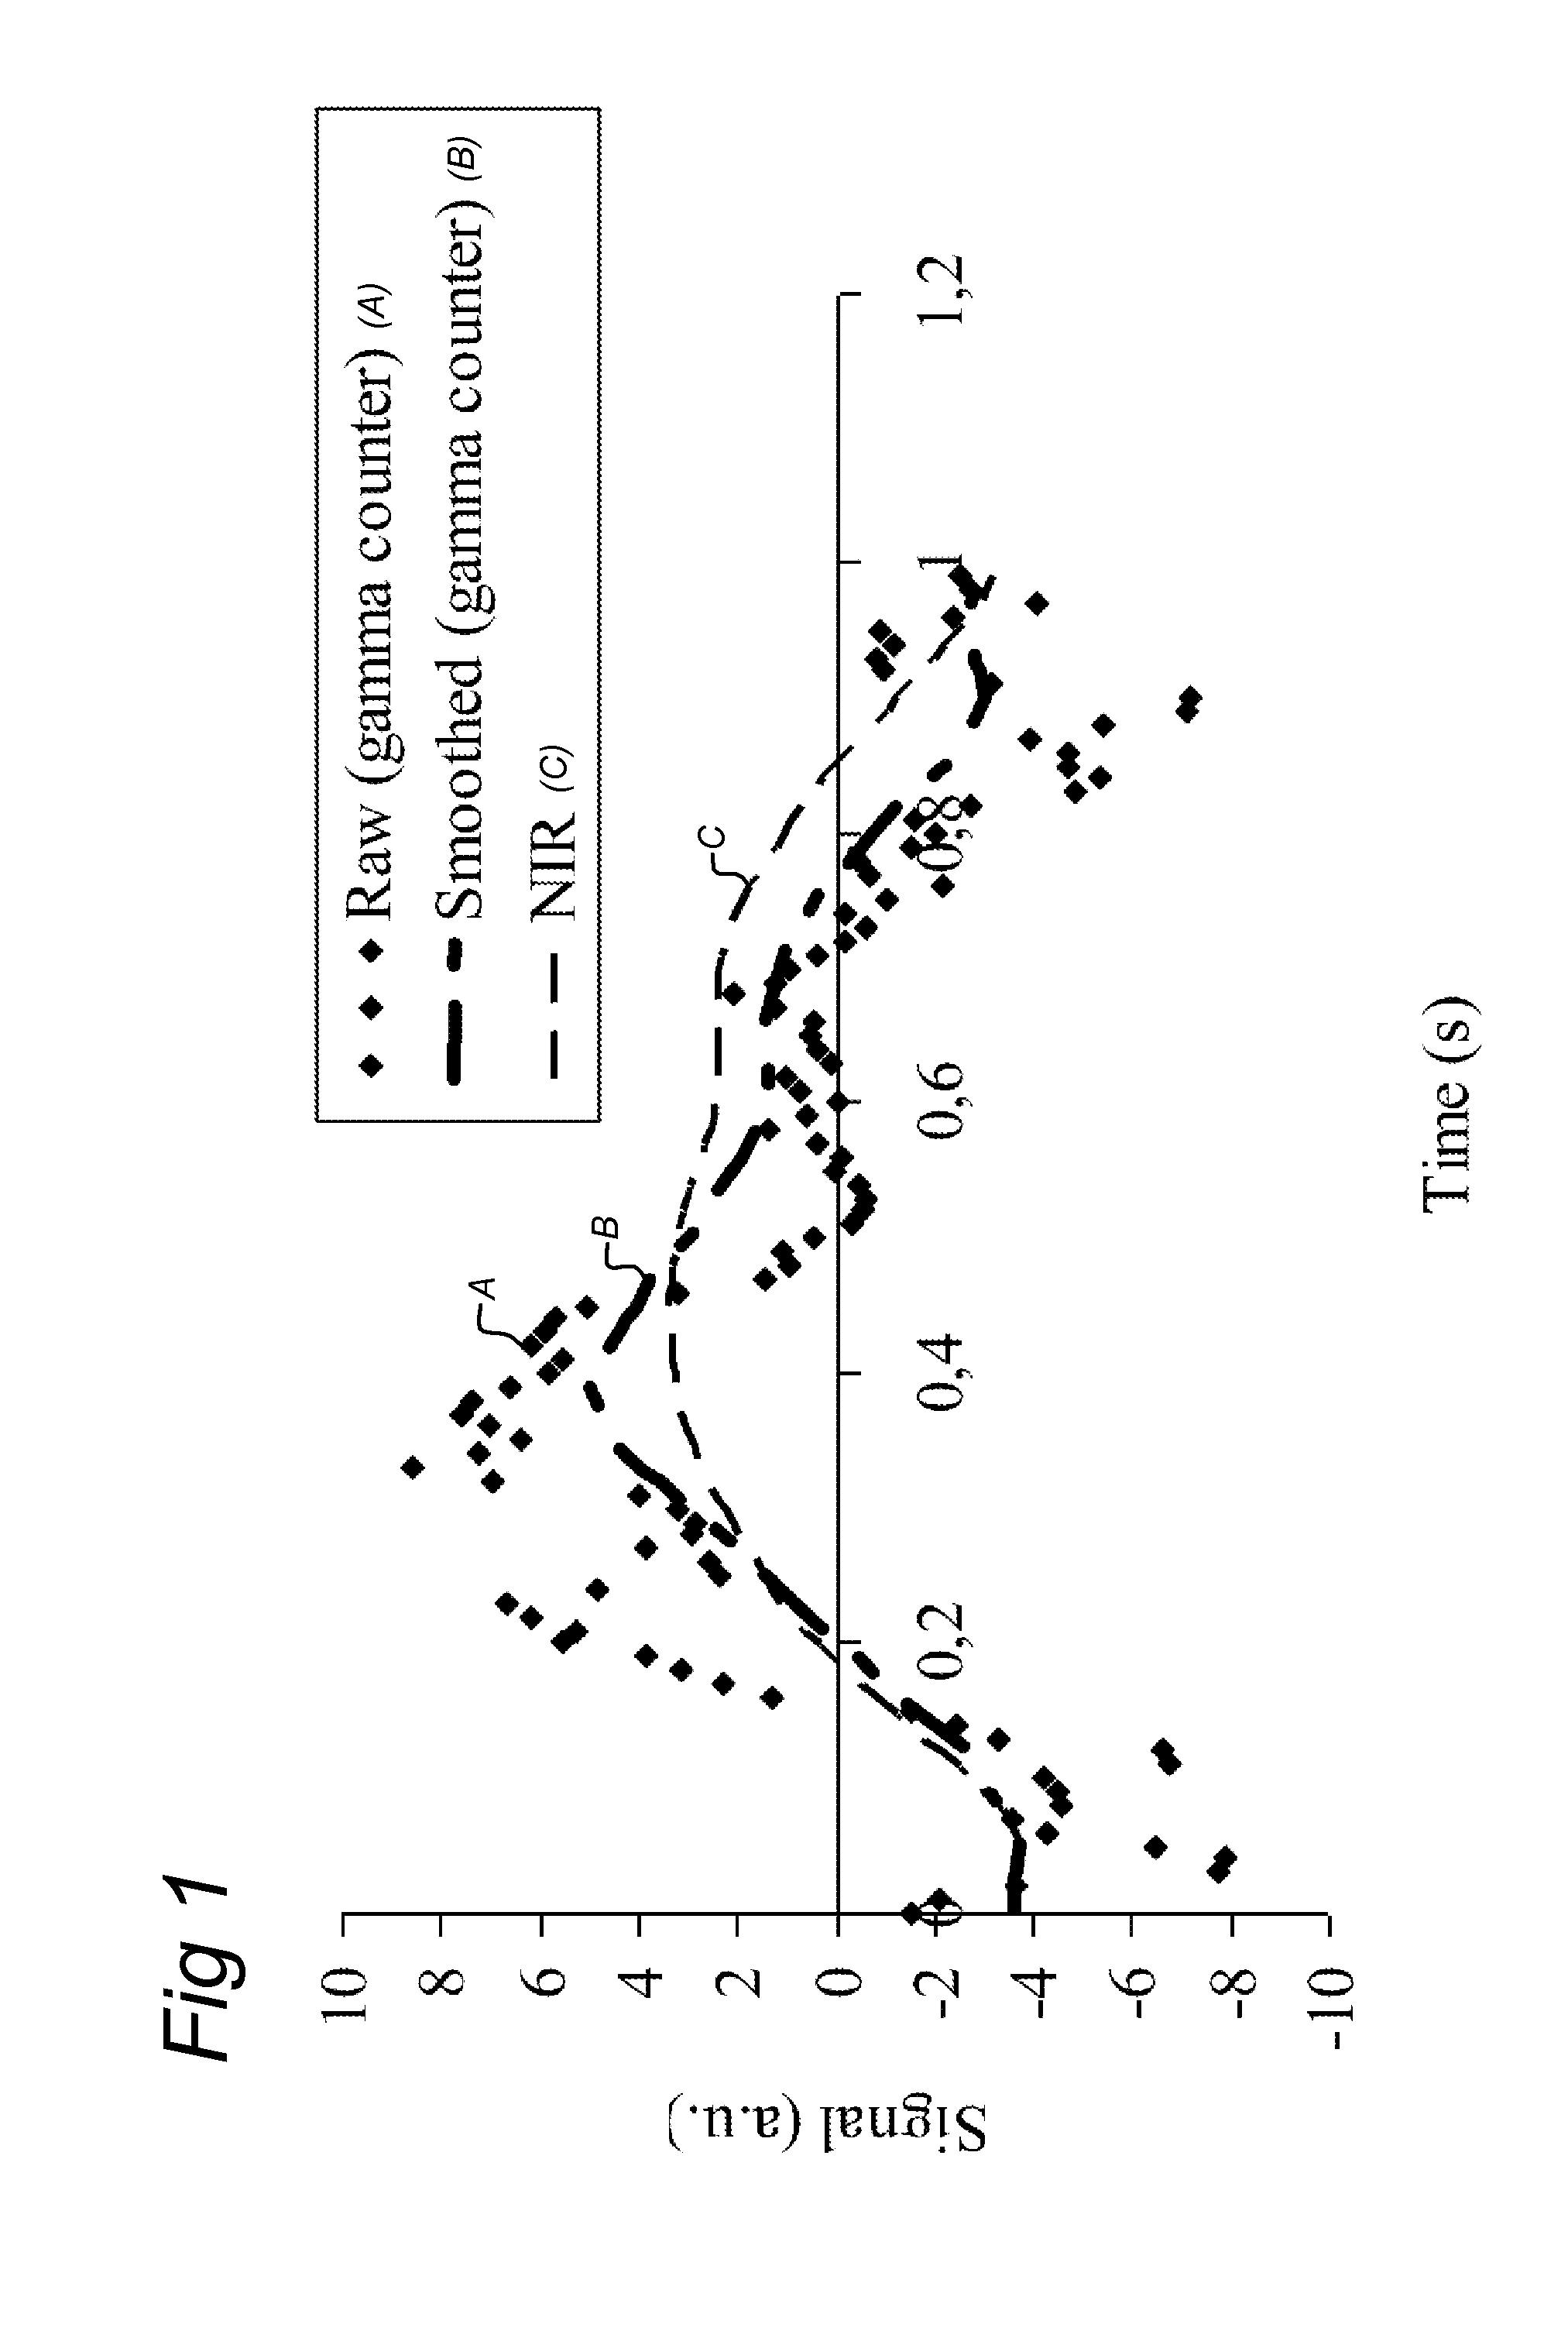 Method for non-invasive quantitative assessment of radioactive tracer levels in the blood stream